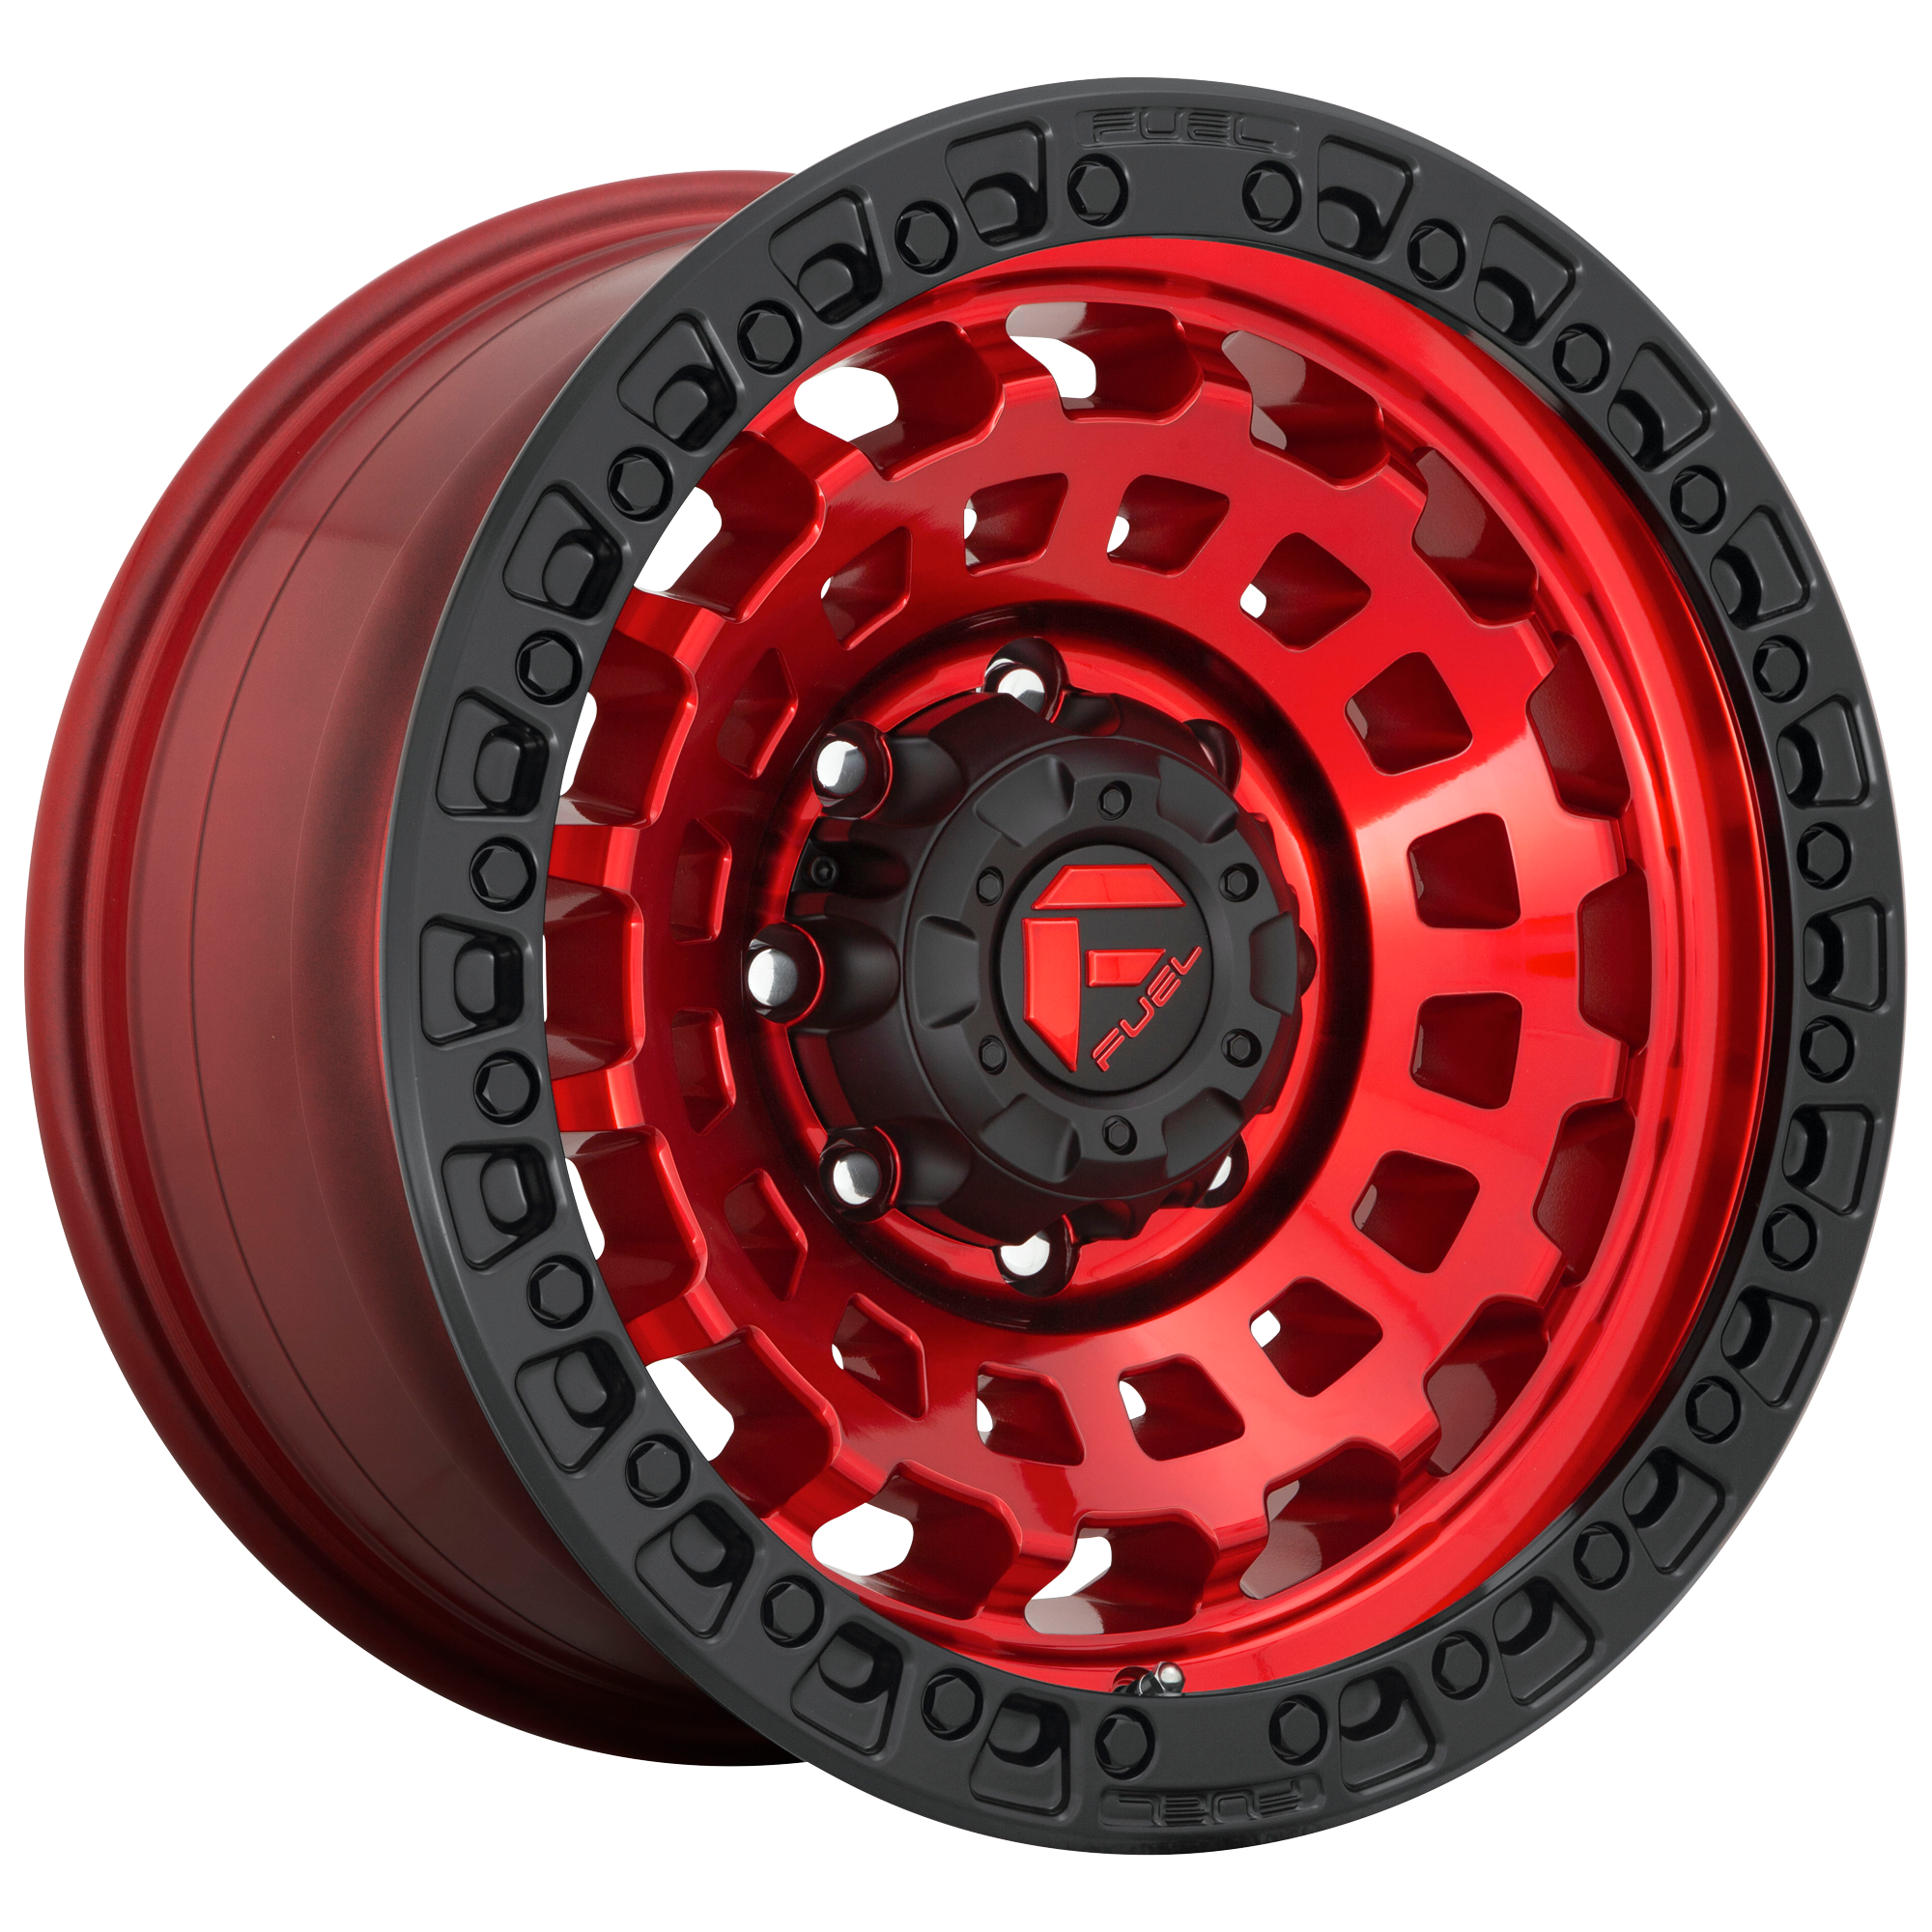 ZEPHYR 20x9 6x139.70 CANDY RED BLACK BEAD RING (20 mm) - Tires and Engine Performance